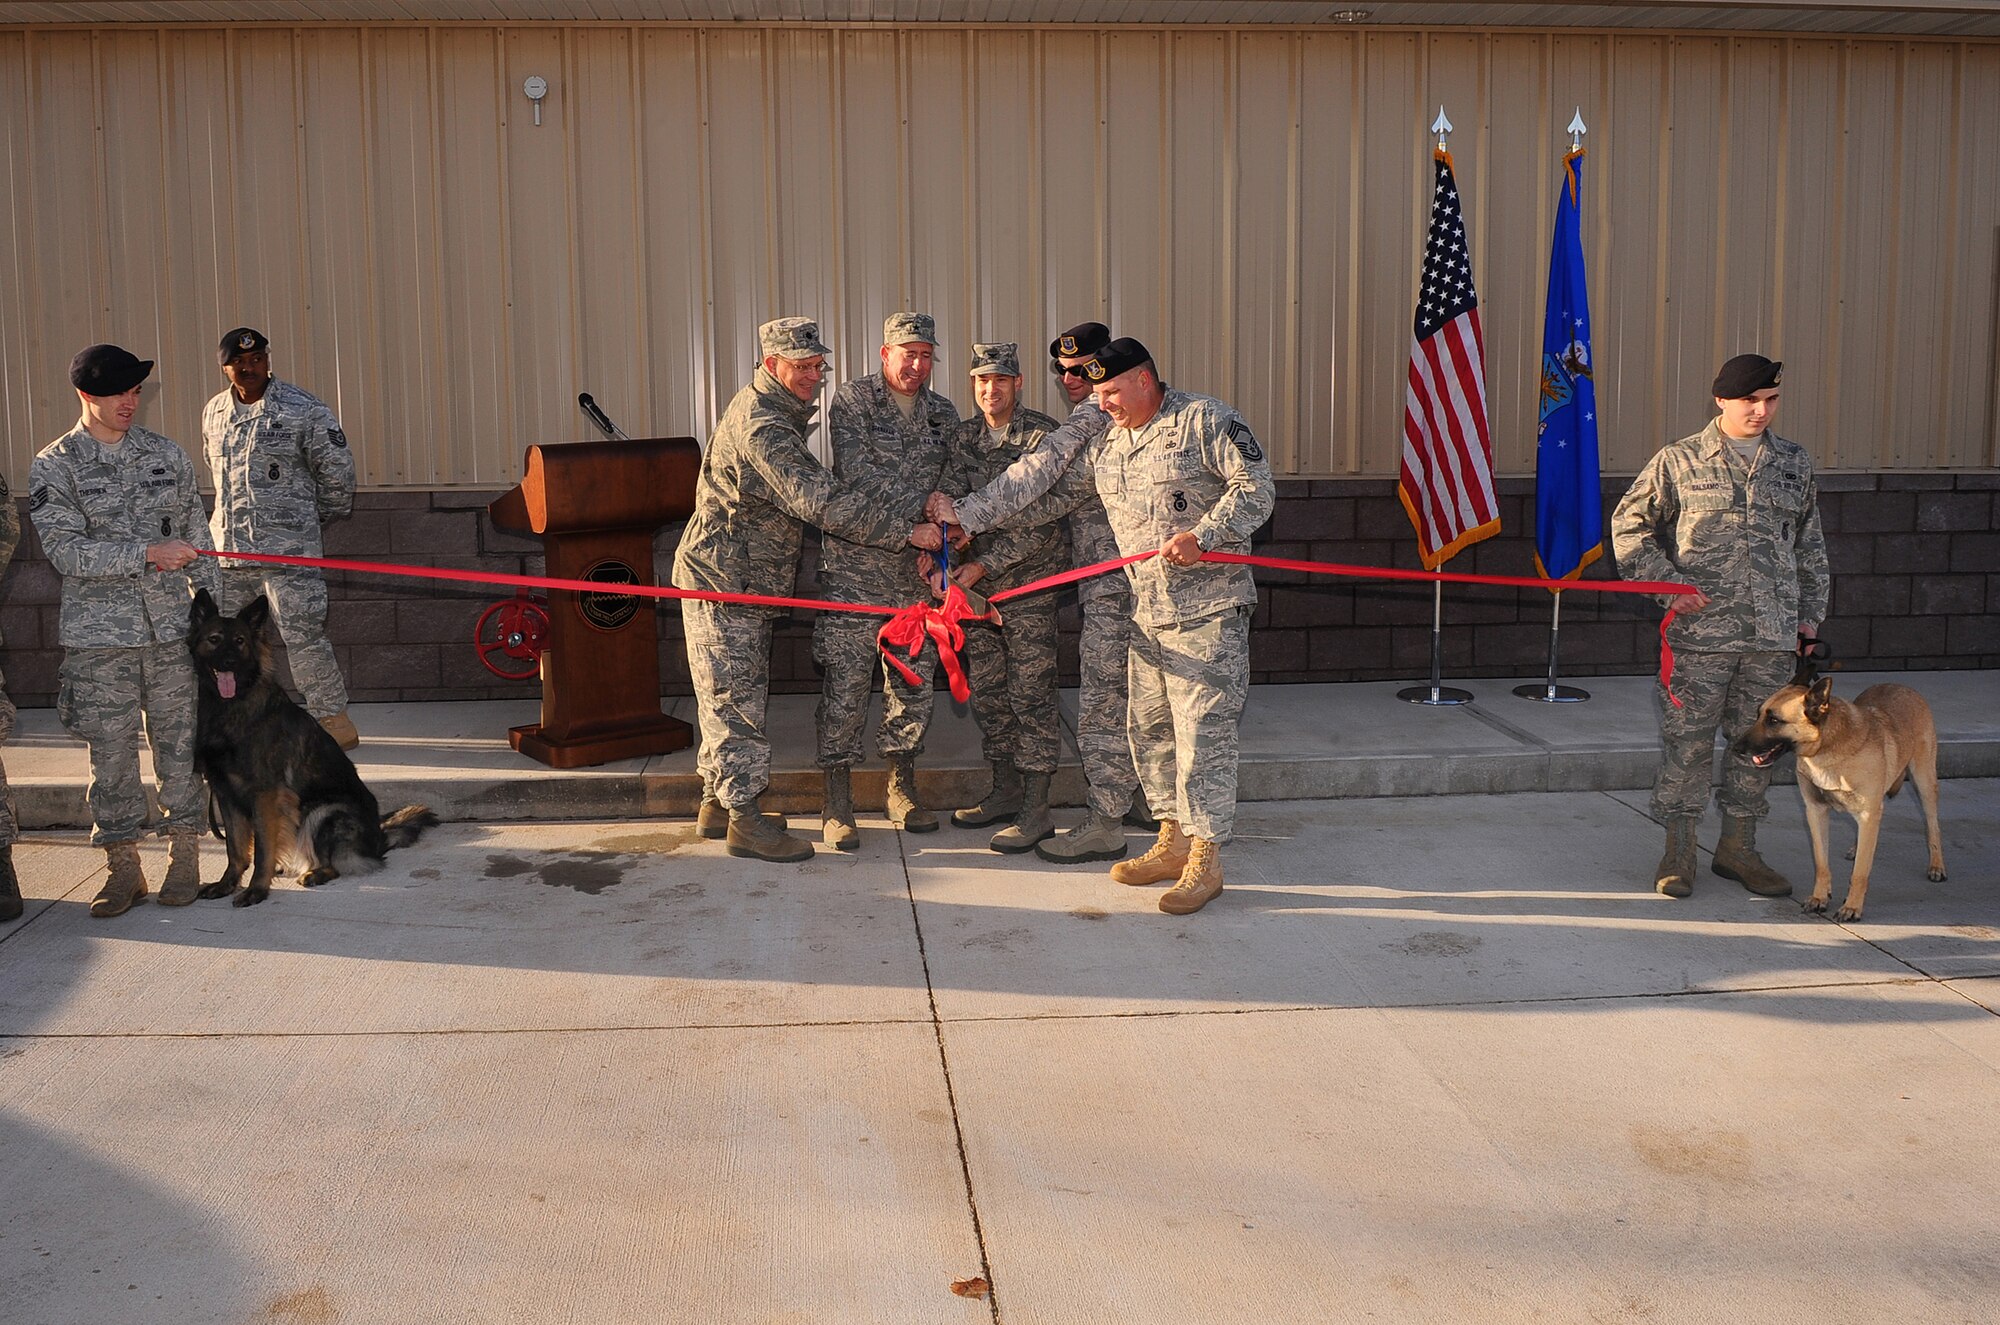 OFFUTT AIR FORCE BASE, Neb. ? Brig. Gen. John N.T. Shanahan, 55th Wing commander, and other Offutt leaders perform the formal ribbon cutting of the newly renovated dog kennels Nov. 18.  The $1.3 million renovation comes well equipped giving the dogs a 10 foot by 14 foot space with private dog house, heated floors, separate isolation kennels for sick dogs and other medical treatment among many other modern amenities.  The 55th Security Forces K-9 section is responsible for searching over 3,000 vehicles a year, securing 54,000 people, protecting and $9 billion in assets.
U.S. Air Force photo by Josh Plueger
